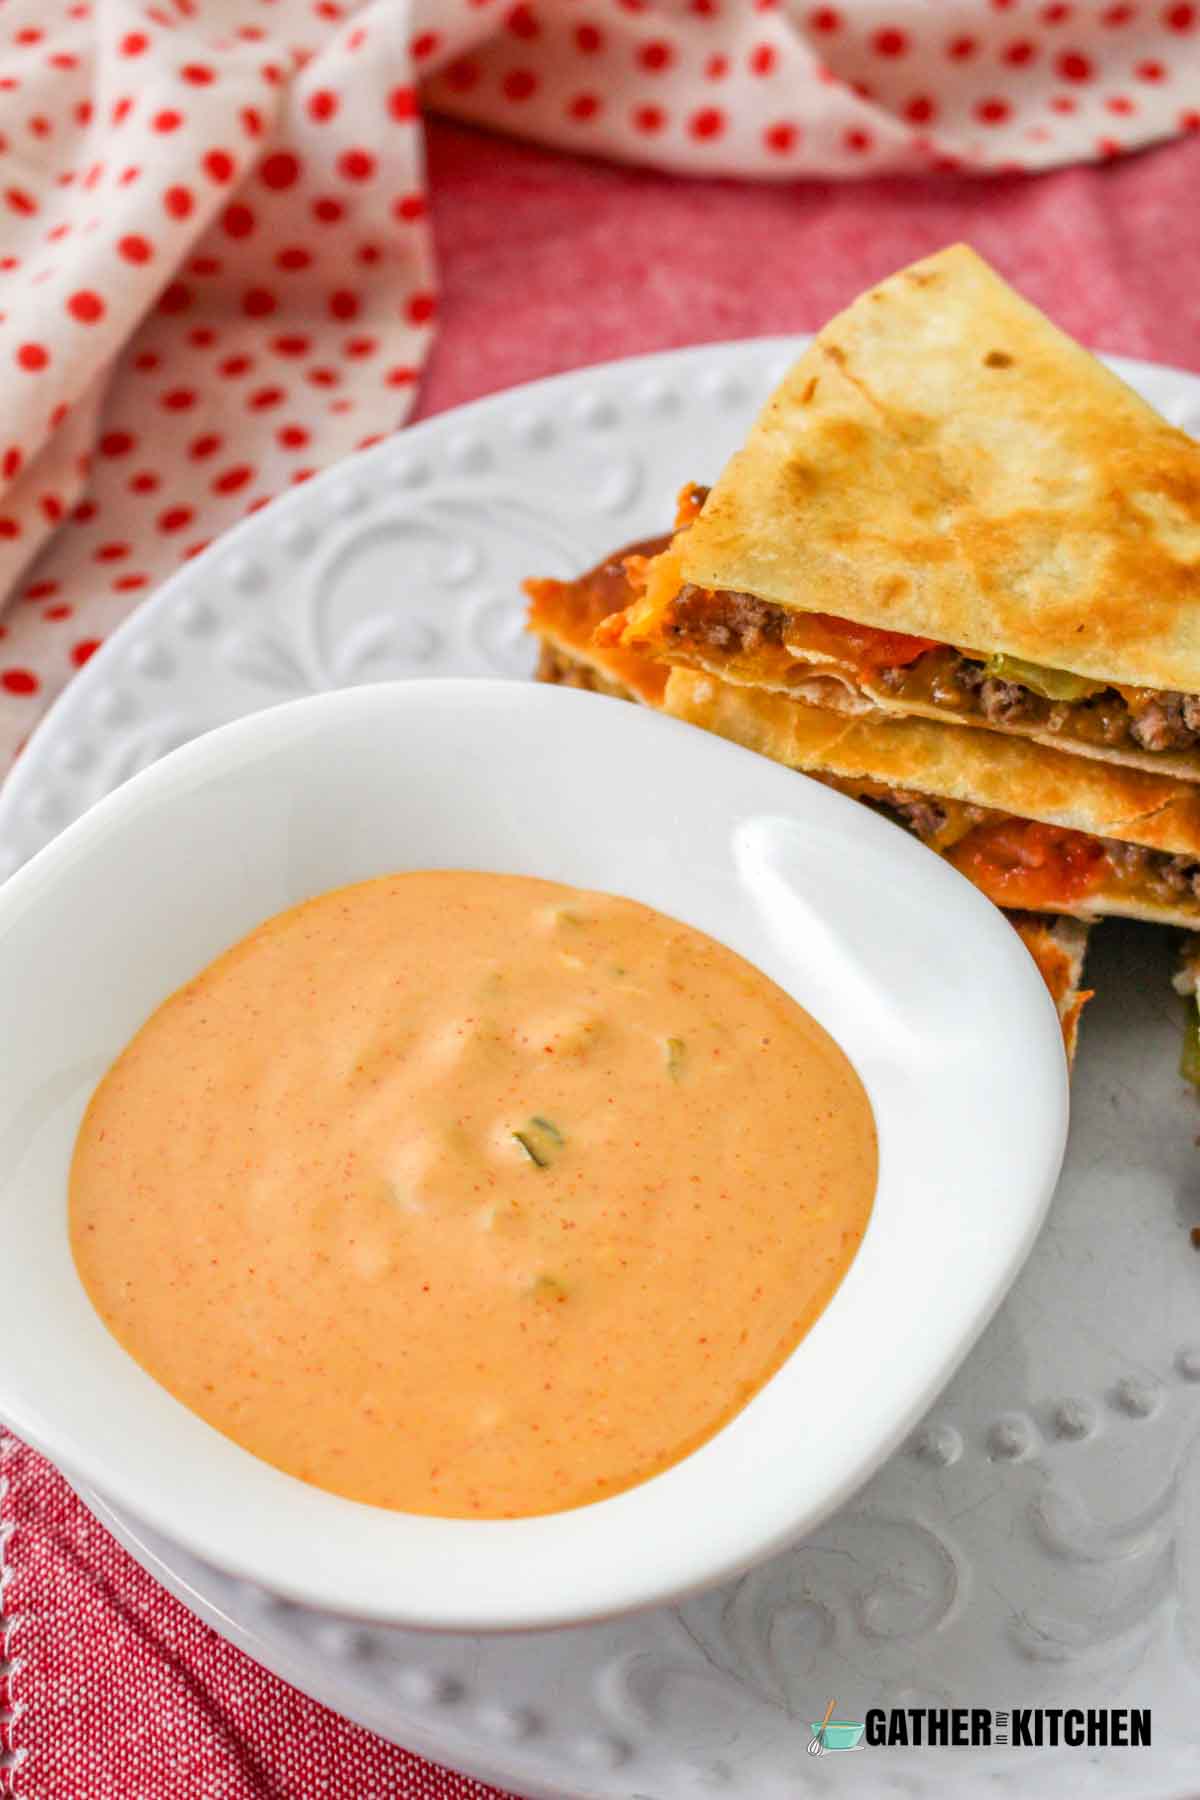 A small bowl of dip on a plate with quesadillas.